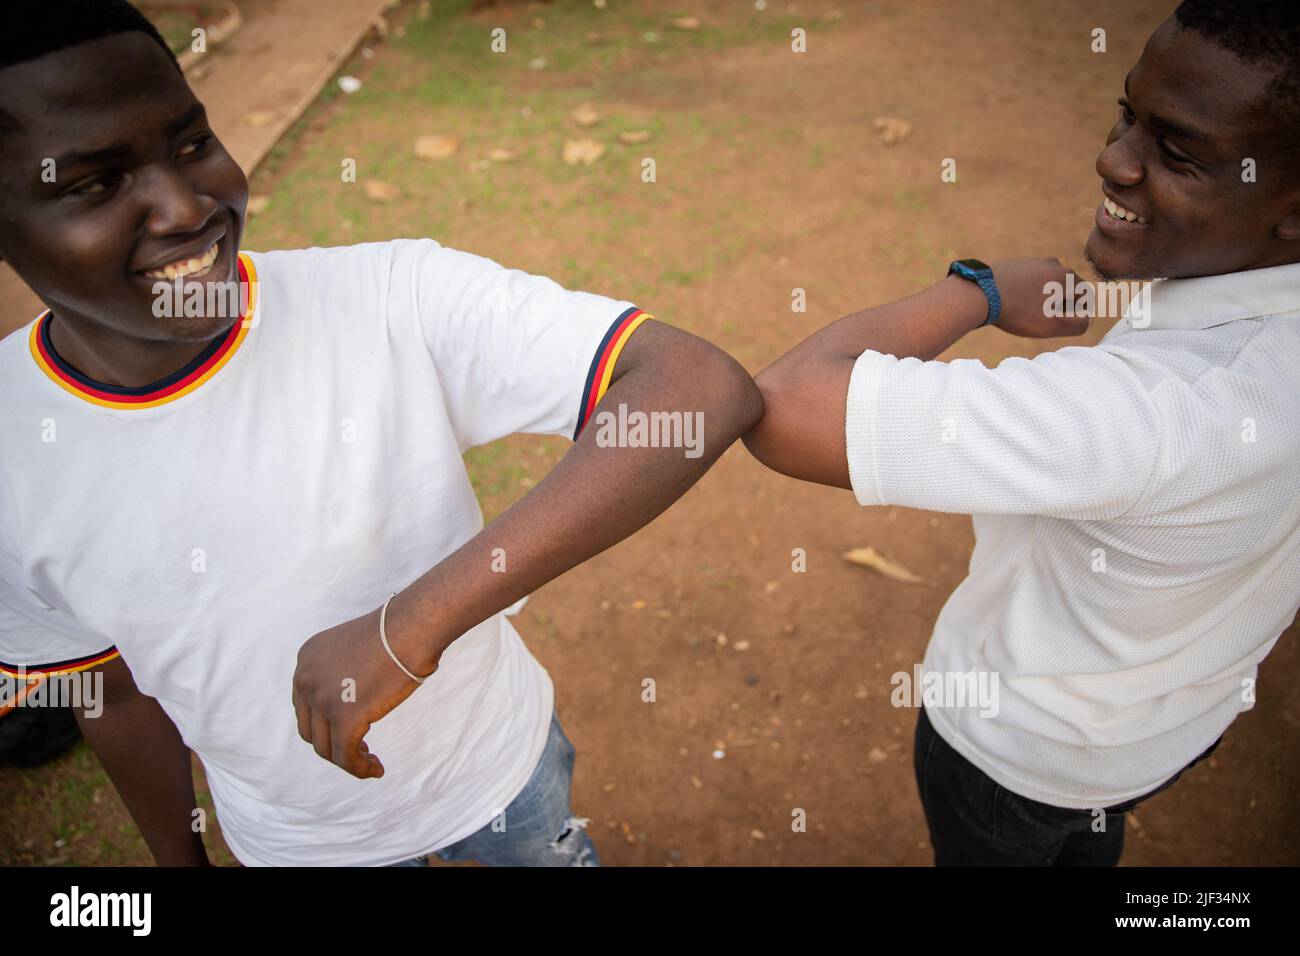 Two friends in africa greeting each other with elbows to reduce contact during coronavirus pandemic, new normal concept Stock Photo